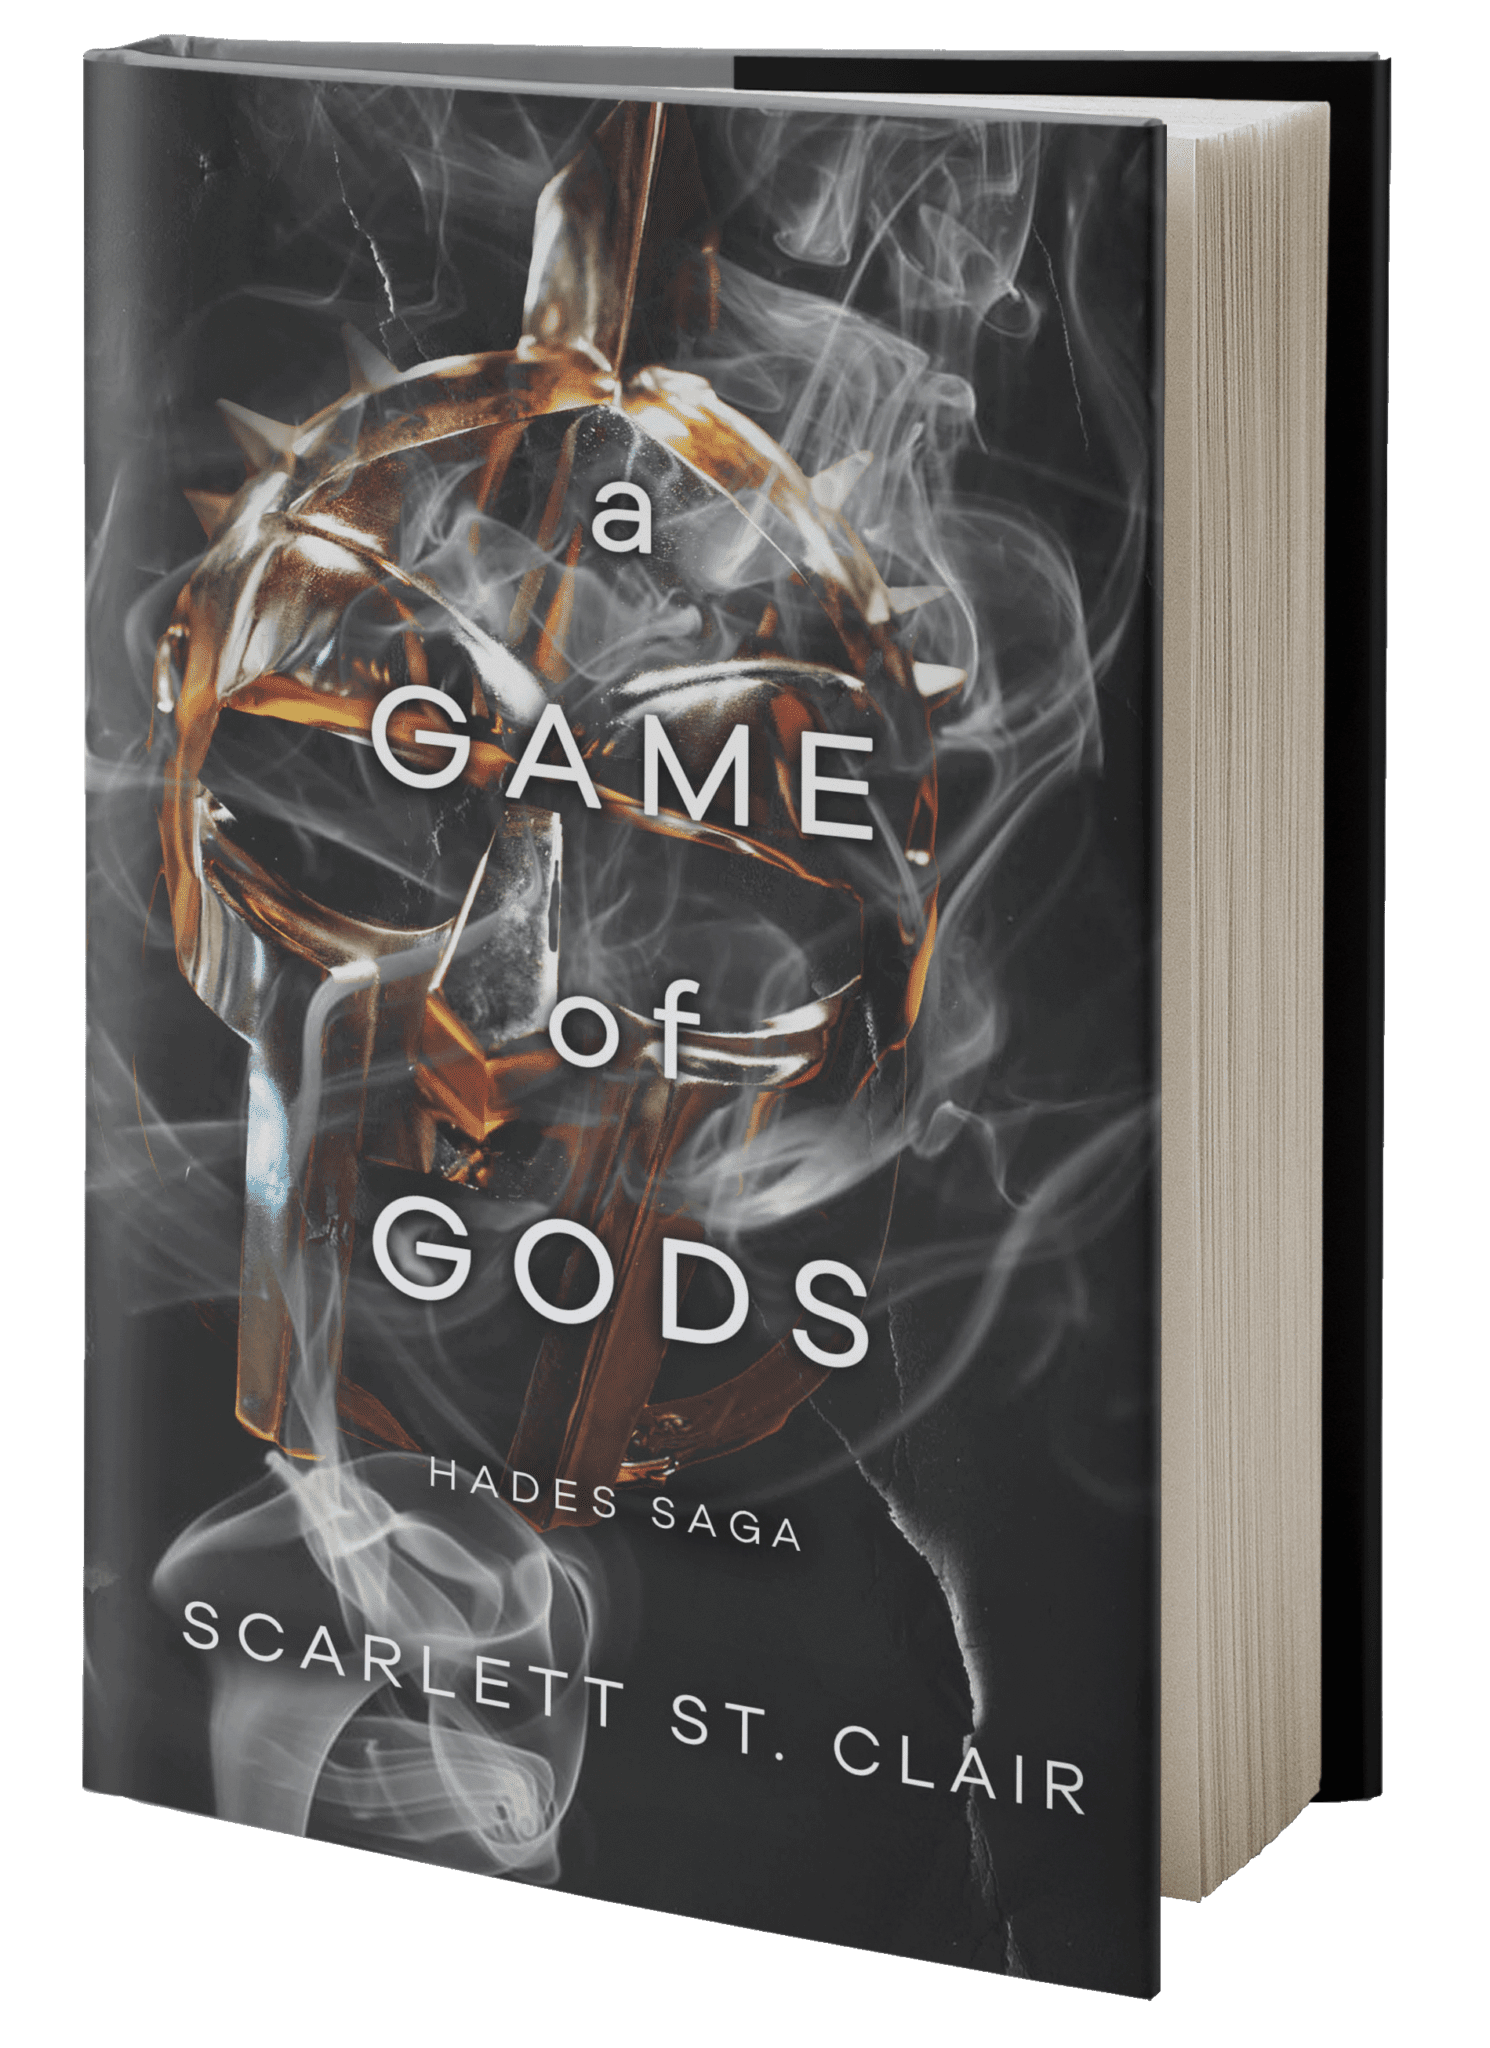 Book cover of "A Game of Gods"